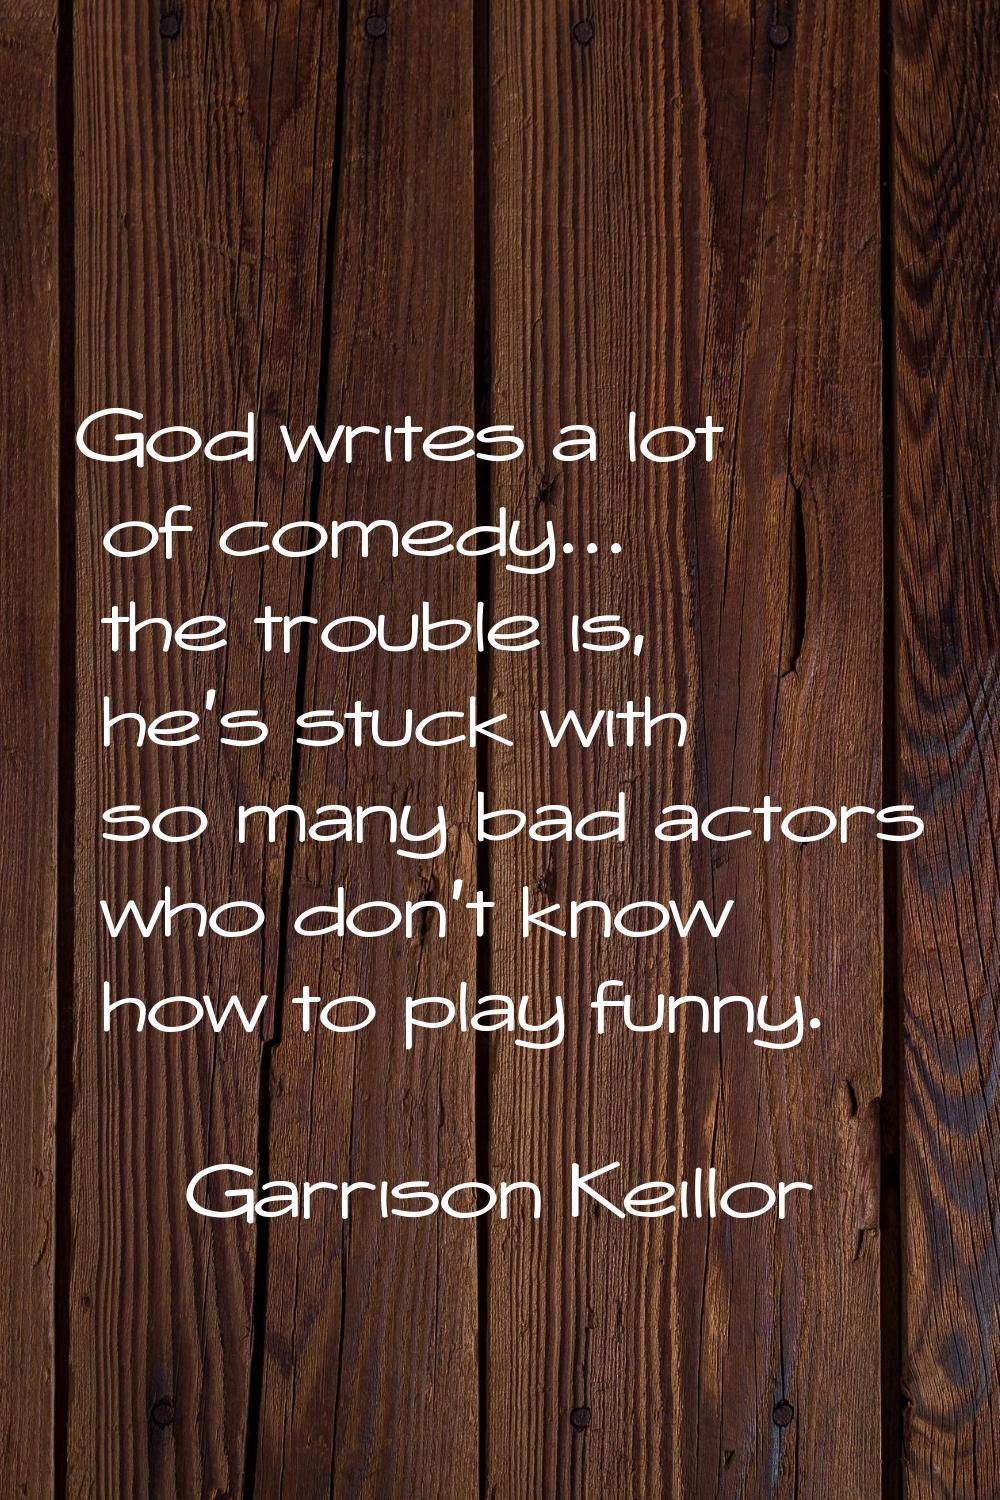 God writes a lot of comedy... the trouble is, he's stuck with so many bad actors who don't know how